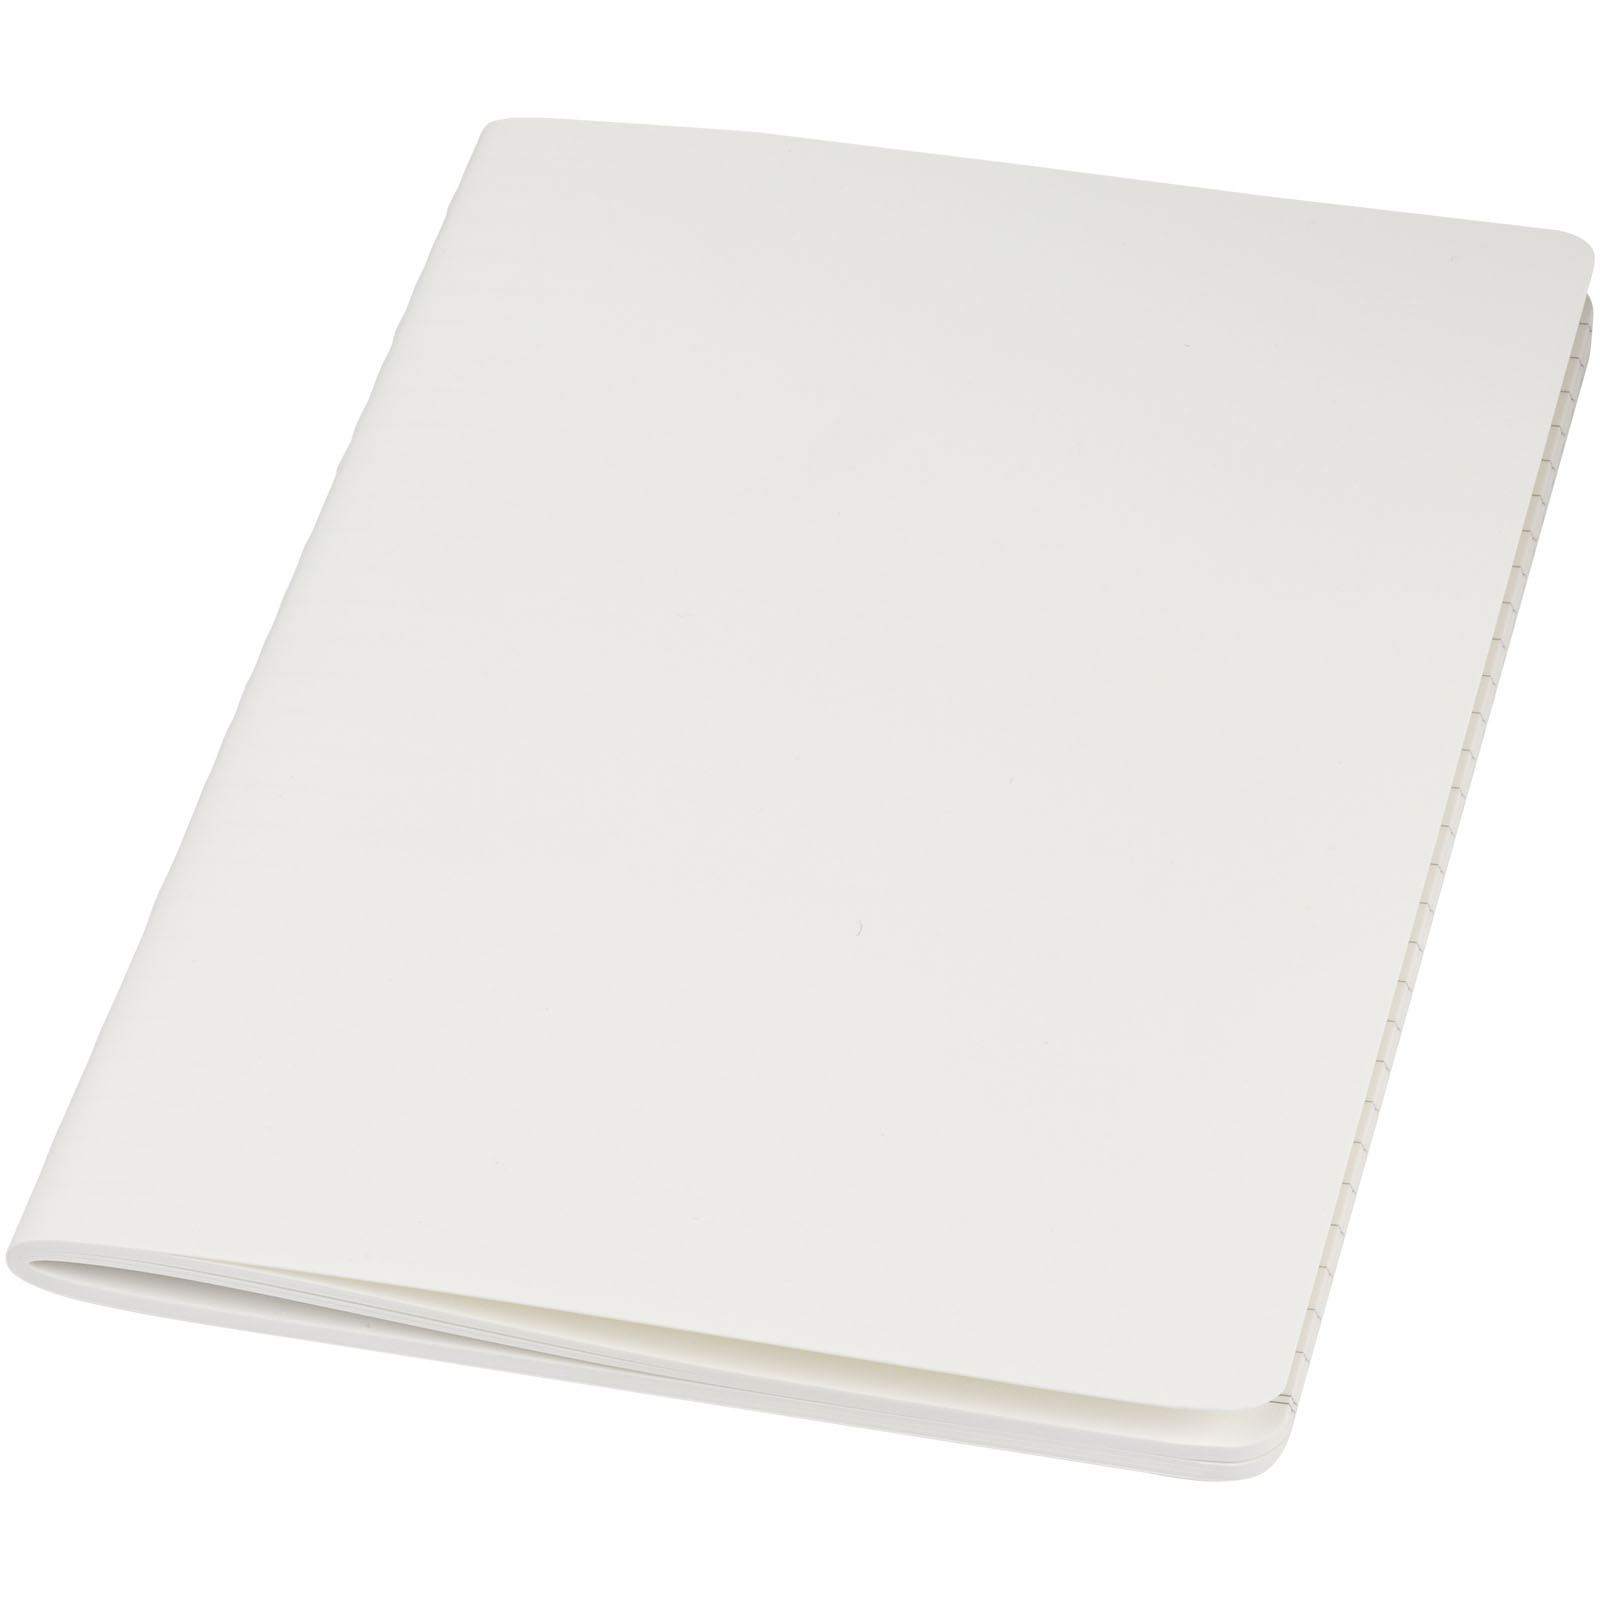 Advertising Soft cover notebooks - Shale stone paper cahier journal